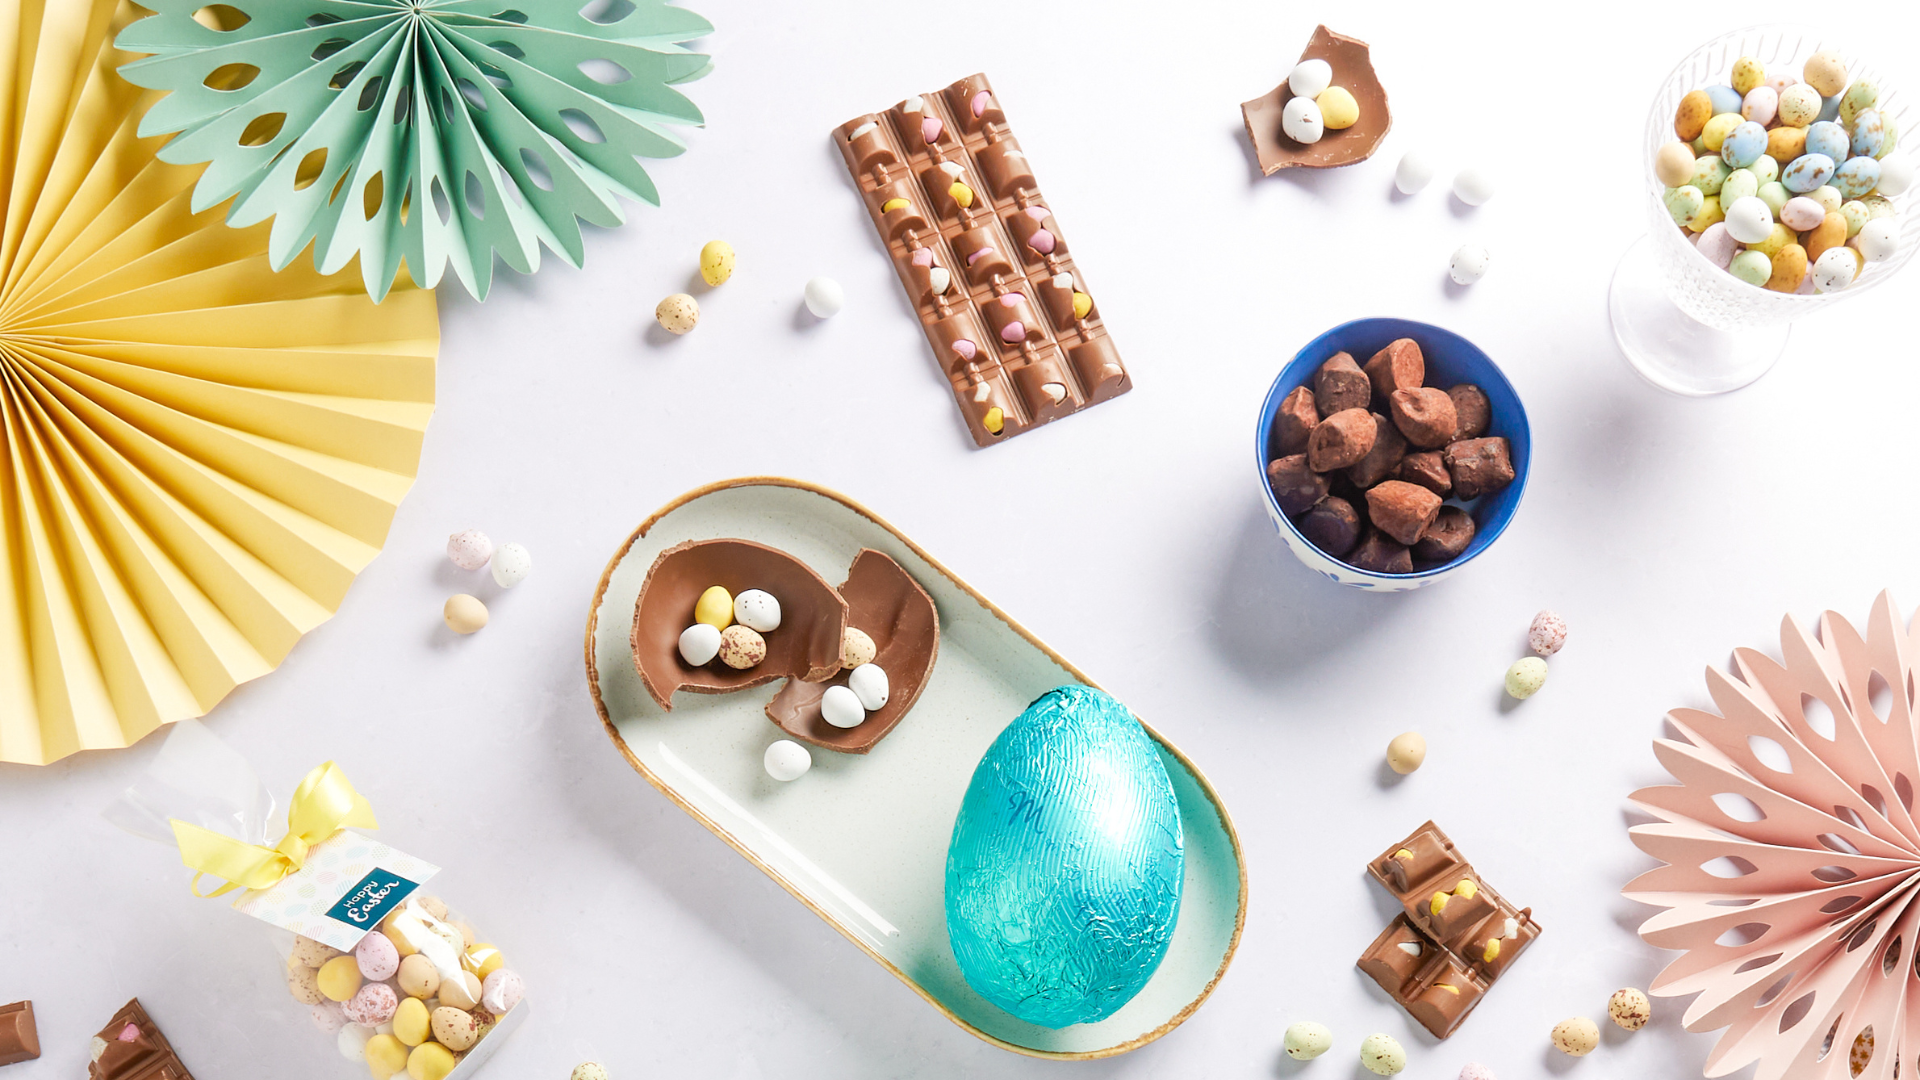 Flat lay of a range of Easter chocolate products including chocolate eggs